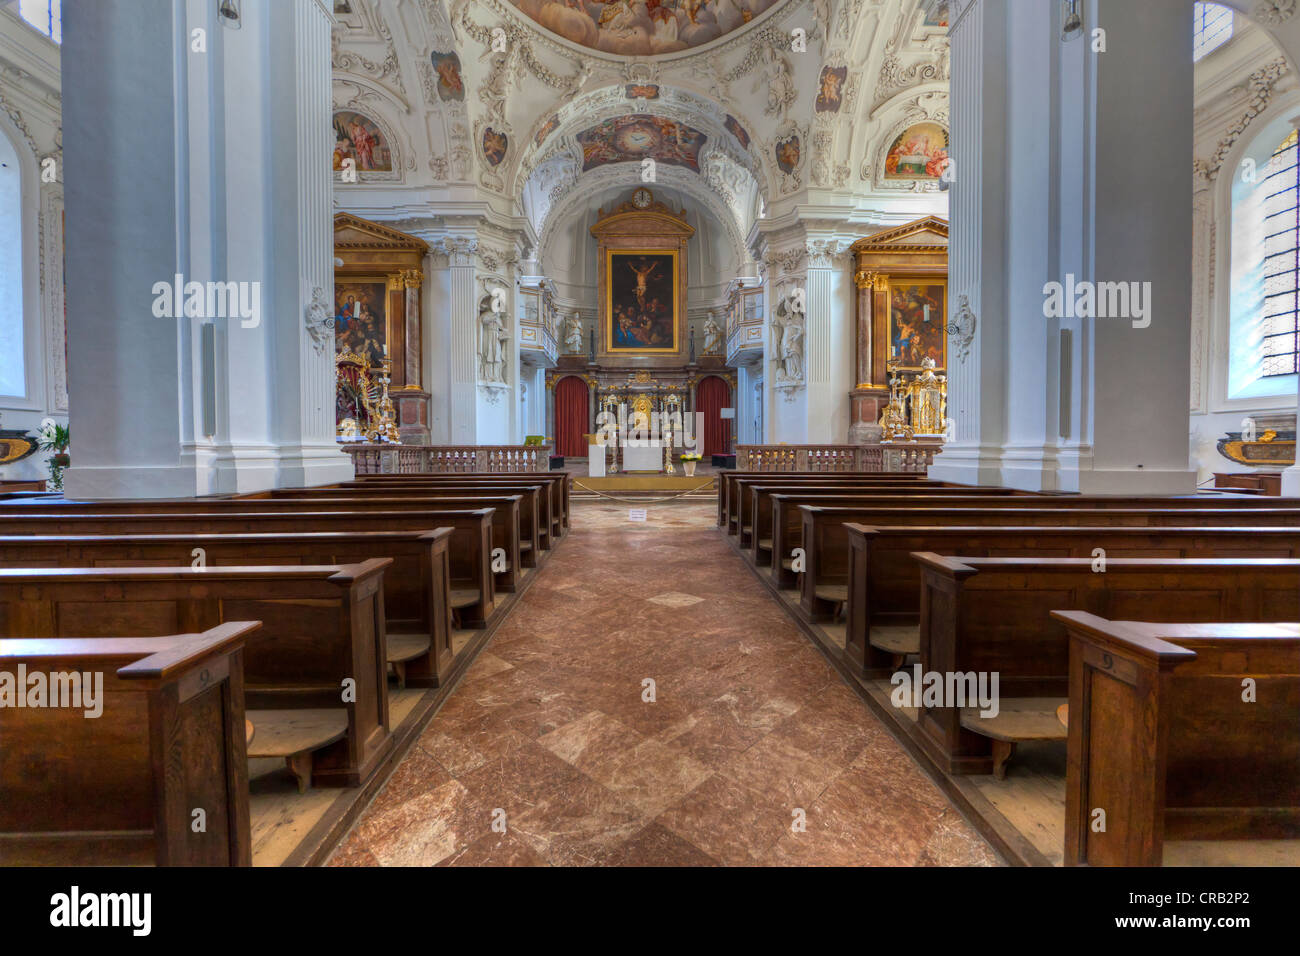 Interior view, Kloster Tegernsee Abbey, former Benedictine Abbey, Tegernsee, Upper Bavaria, Germany, Europe Stock Photo